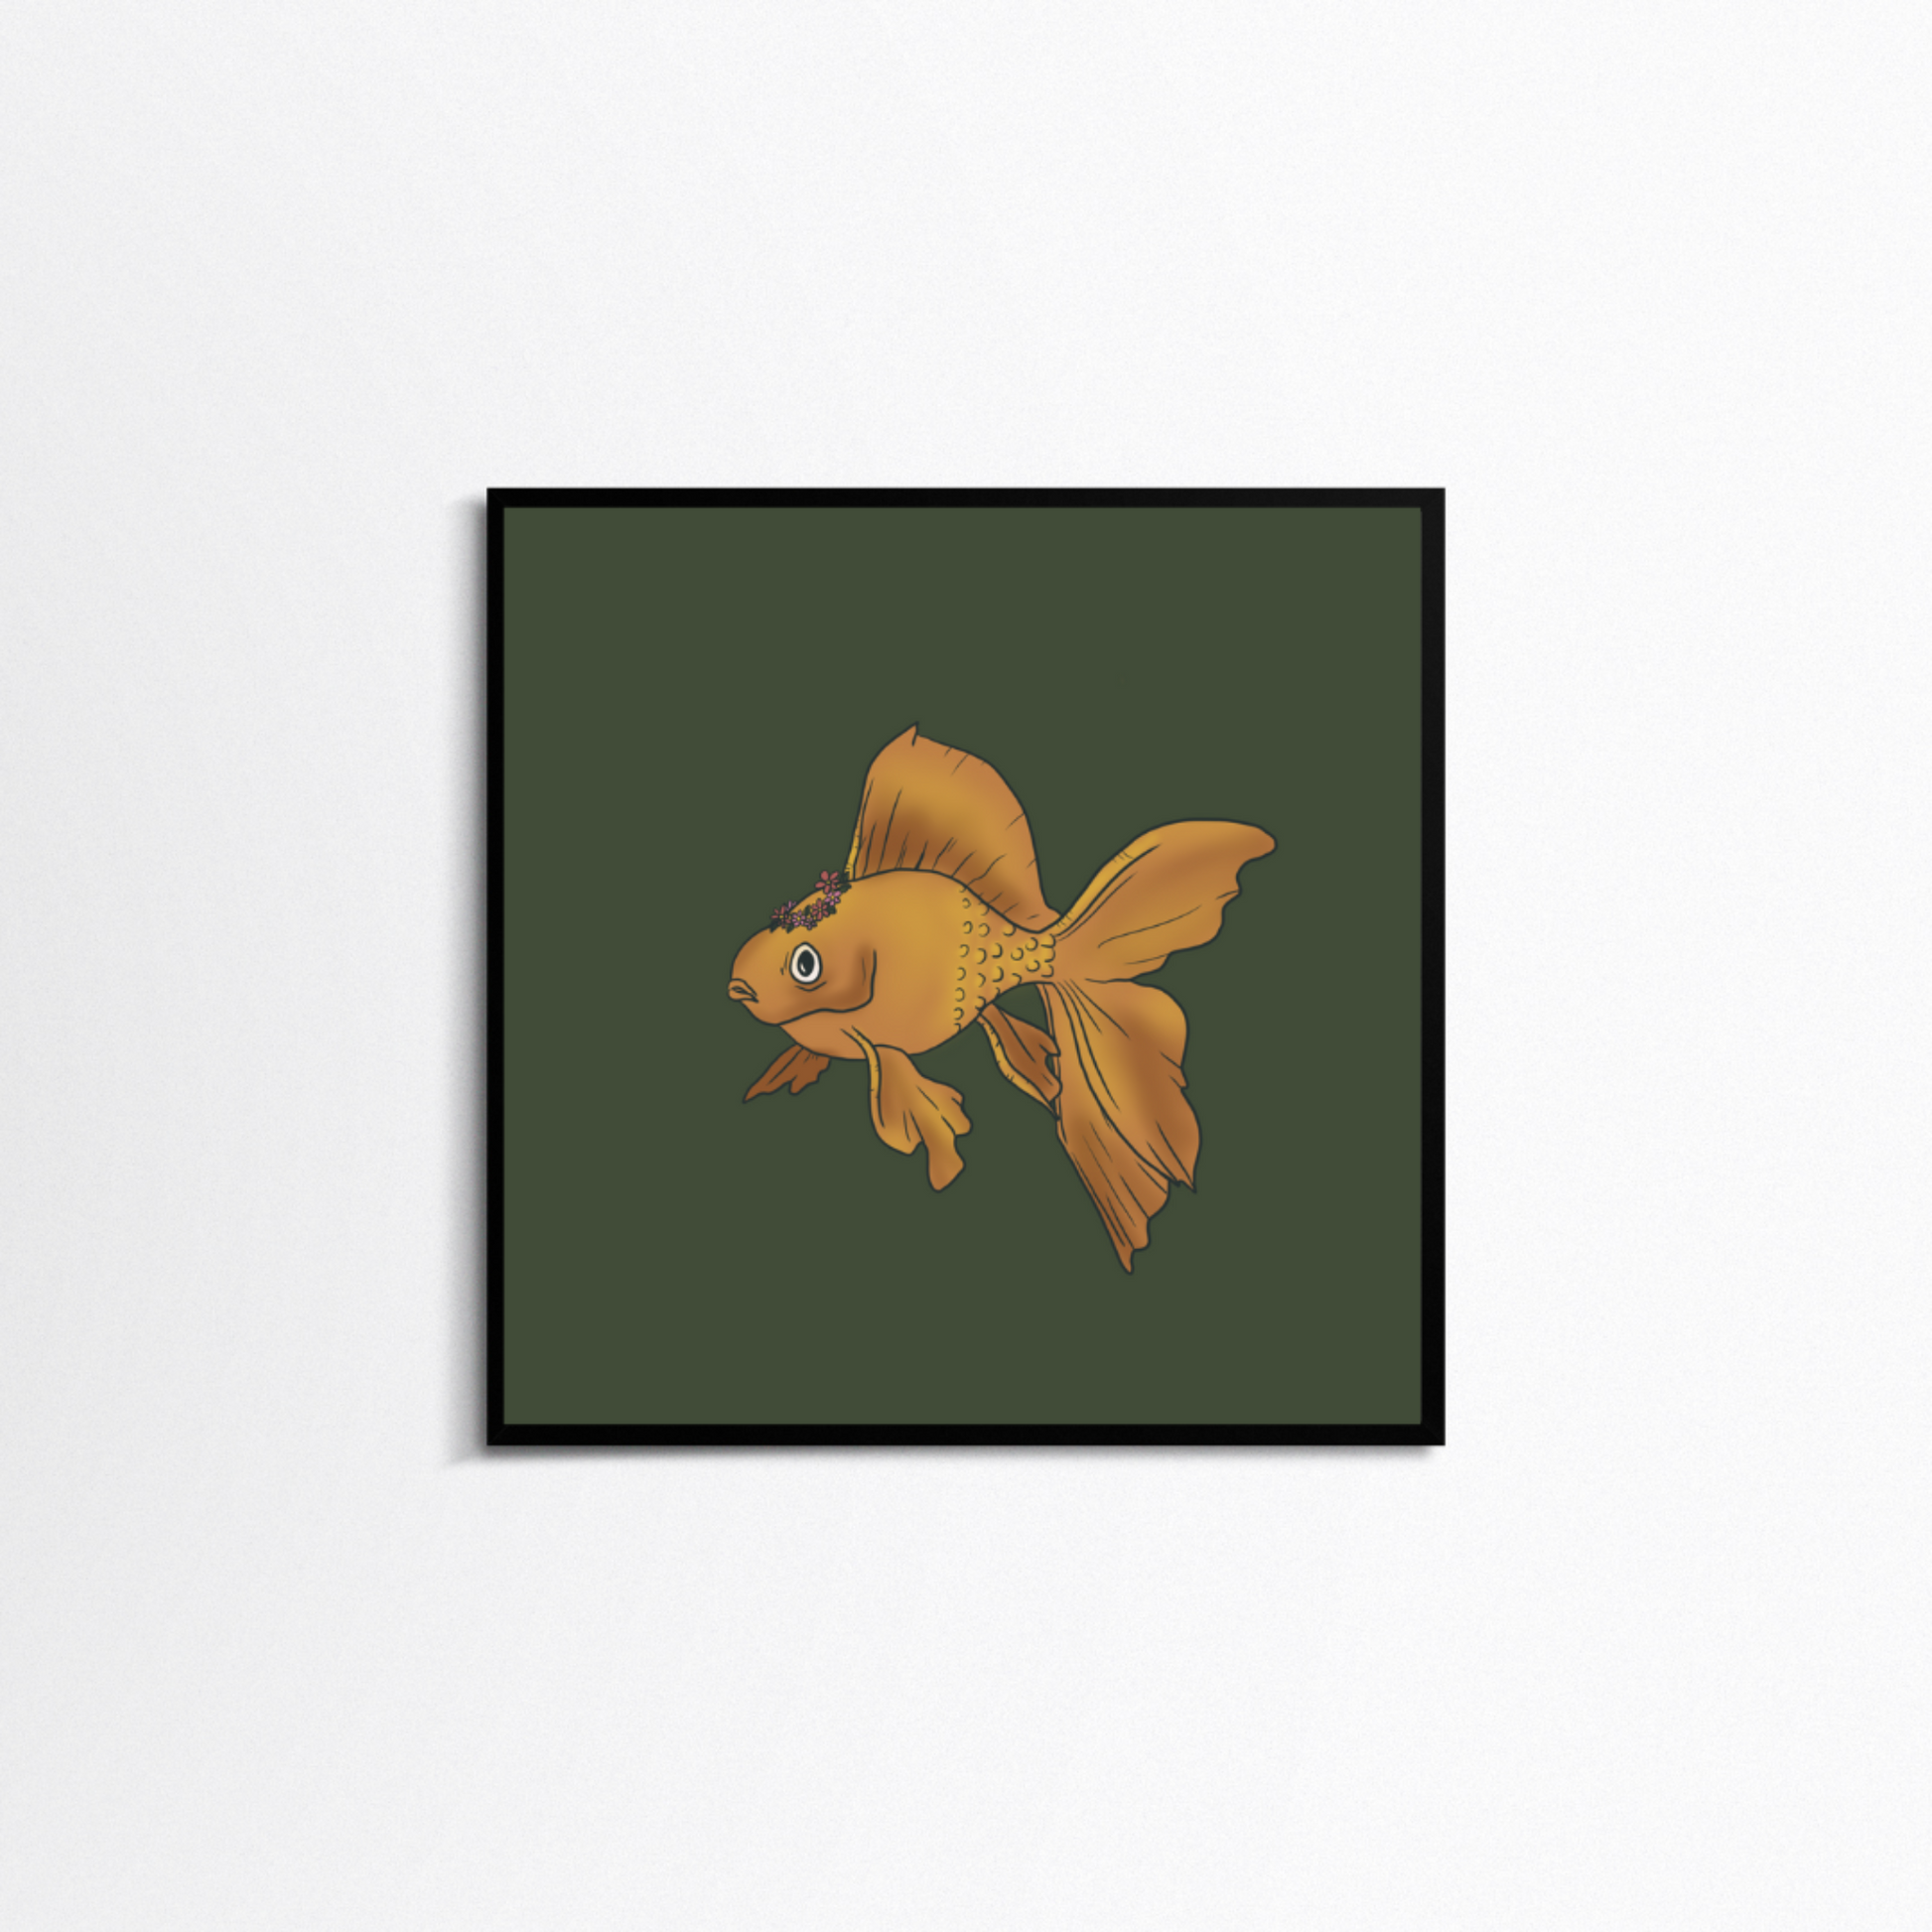 White background with a square black frame. In the frame is a print with a moss green background and a yellow goldfish in the middle. On the top of the goldfish is a pink flower crown.